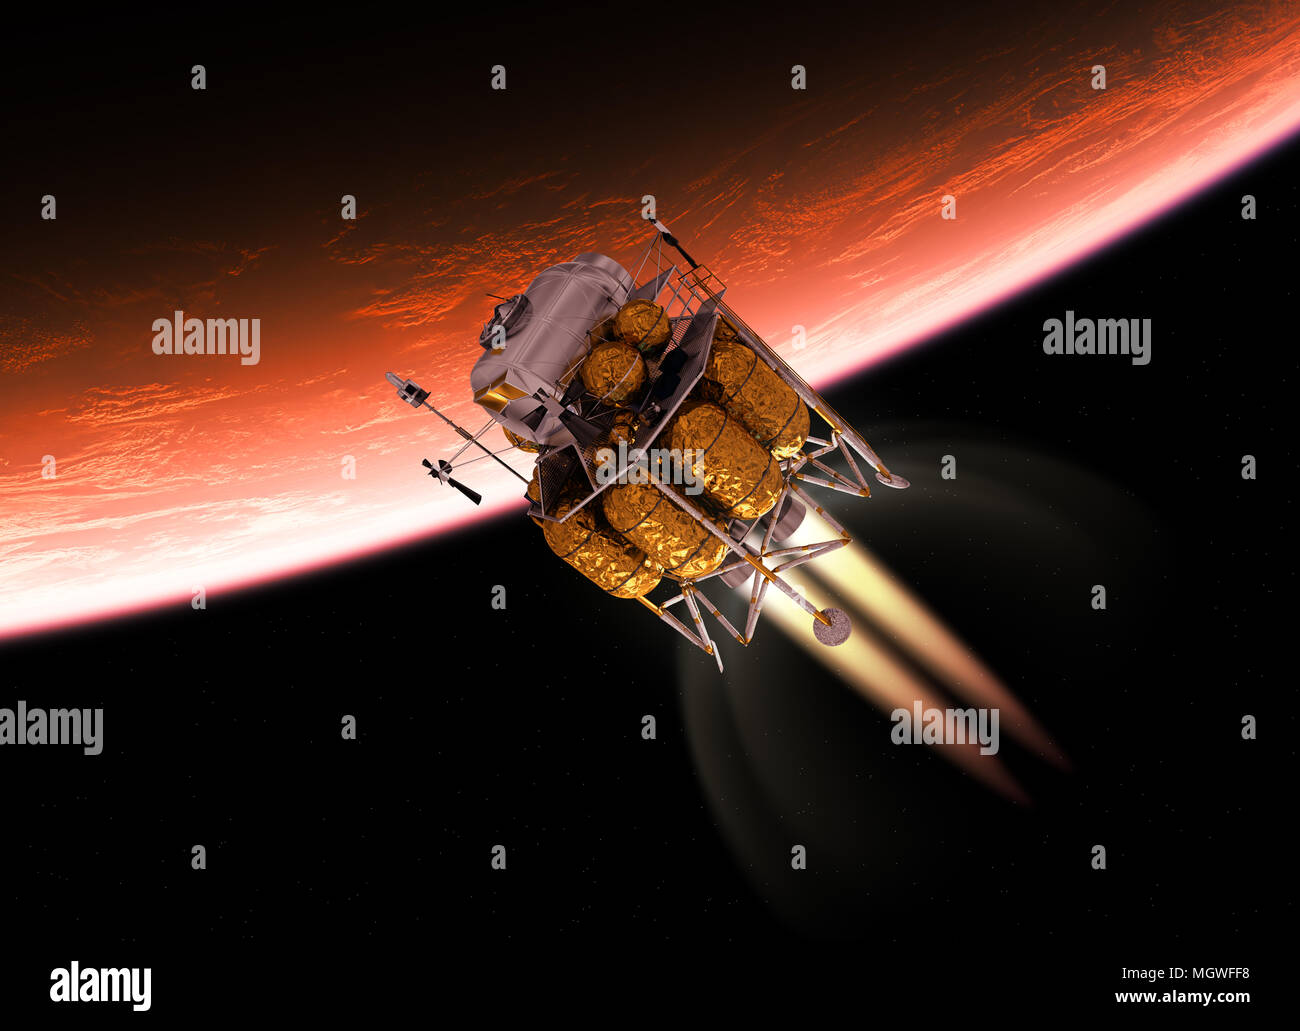 Interplanetary Space Station Orbiting Red Planet. 3D Illustration. Stock Photo